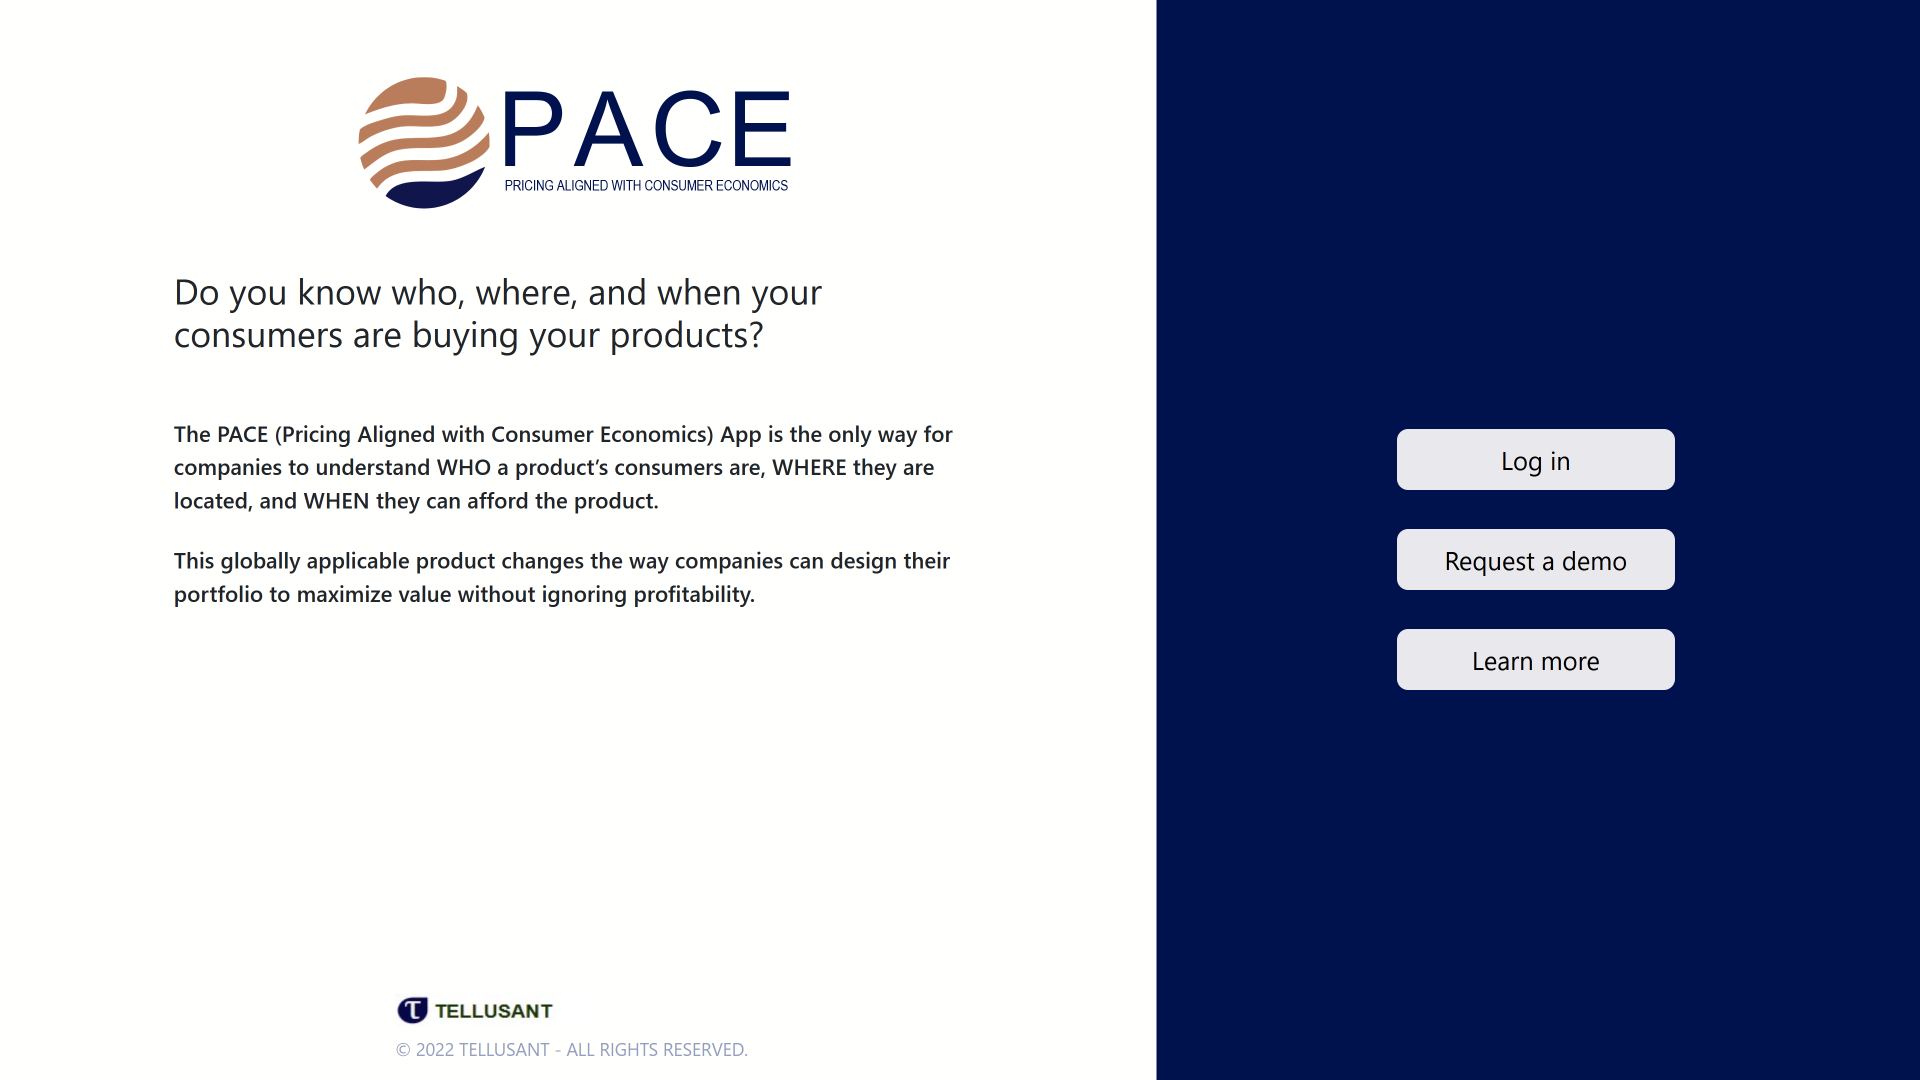 When you first visit PACE, you will be greeted with this sign-up page.